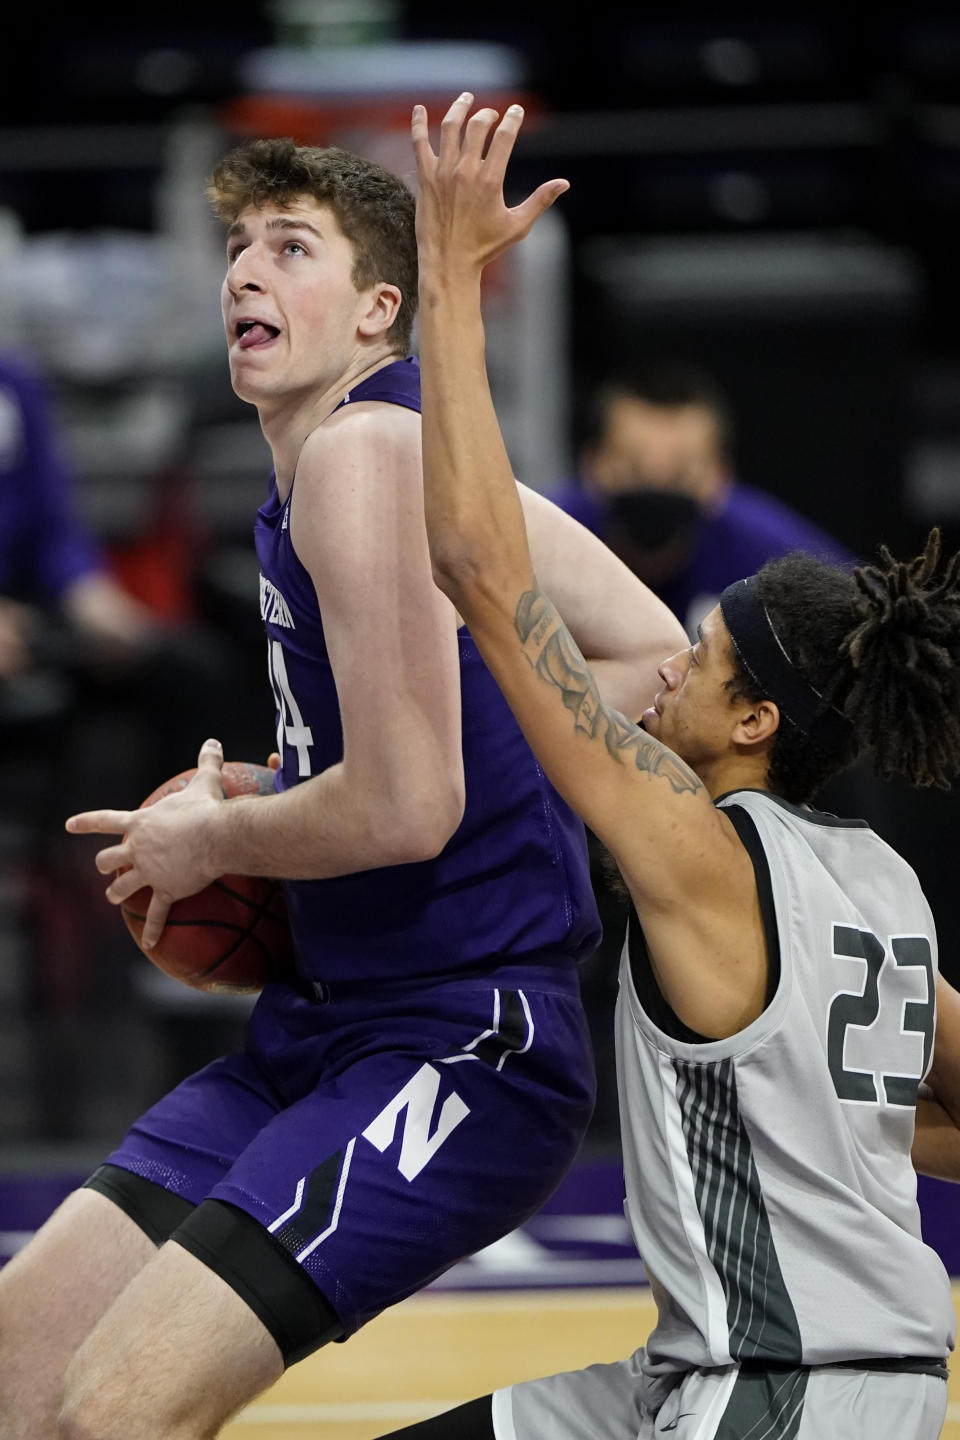 Northwestern center Matthew Nicholson, left, drives to the basket against Chicago State forward Jordan Polynice during the second half of an NCAA college basketball game in Evanston, Ill., Saturday, Dec. 5, 2020. (AP Photo/Nam Y. Huh)